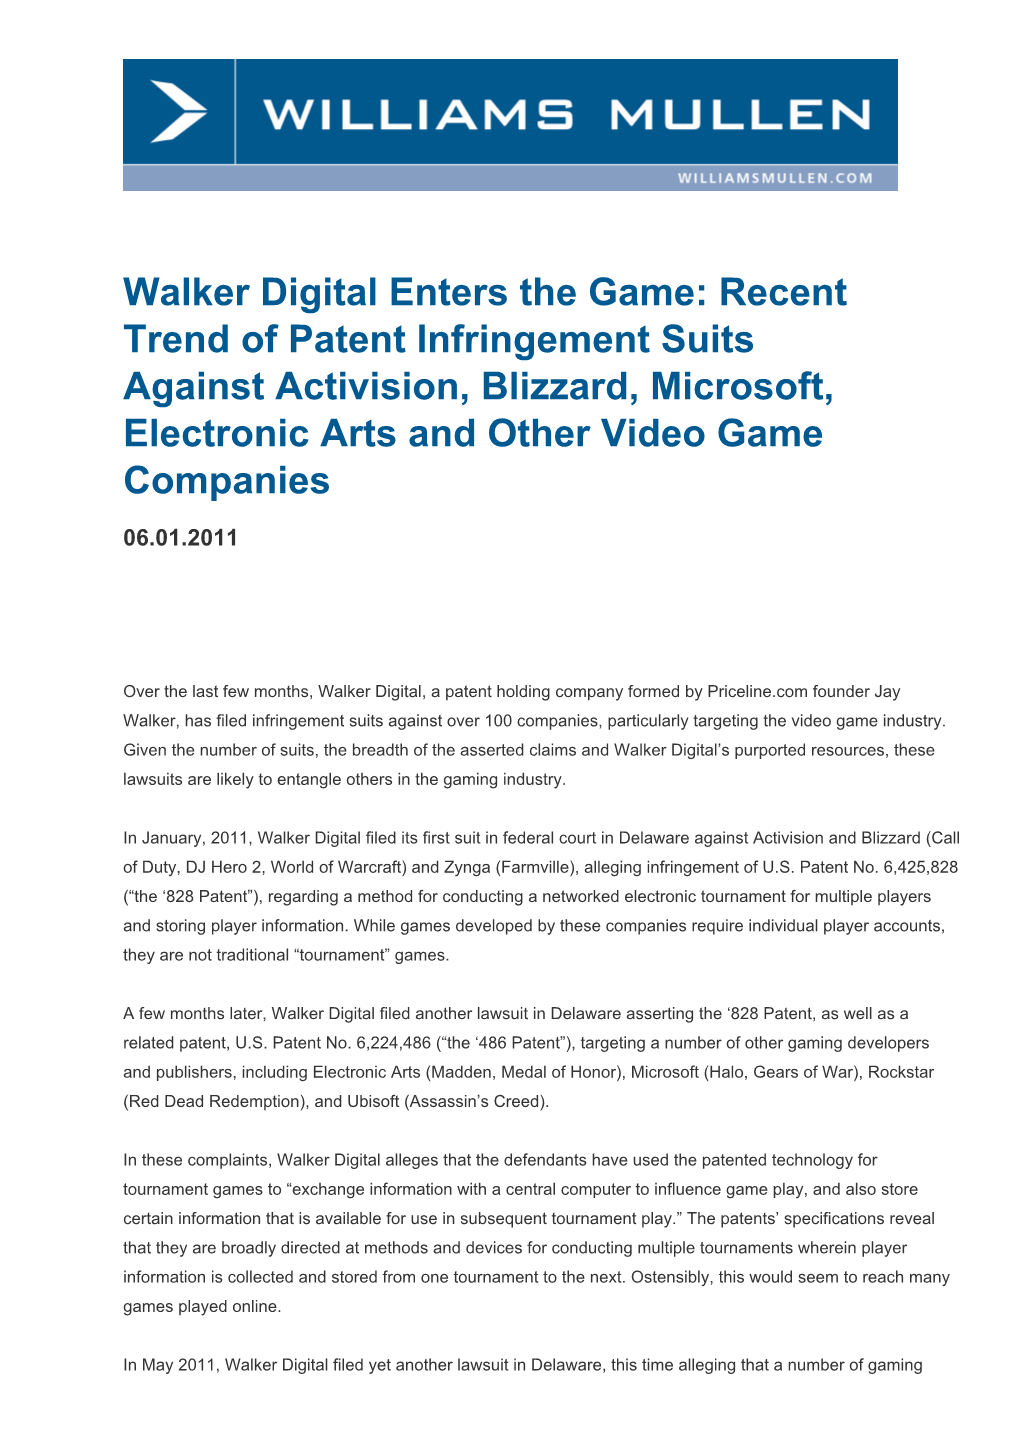 Recent Trend of Patent Infringement Suits Against Activision, Blizzard, Microsoft, Electronic Arts and Other Video Game Companies